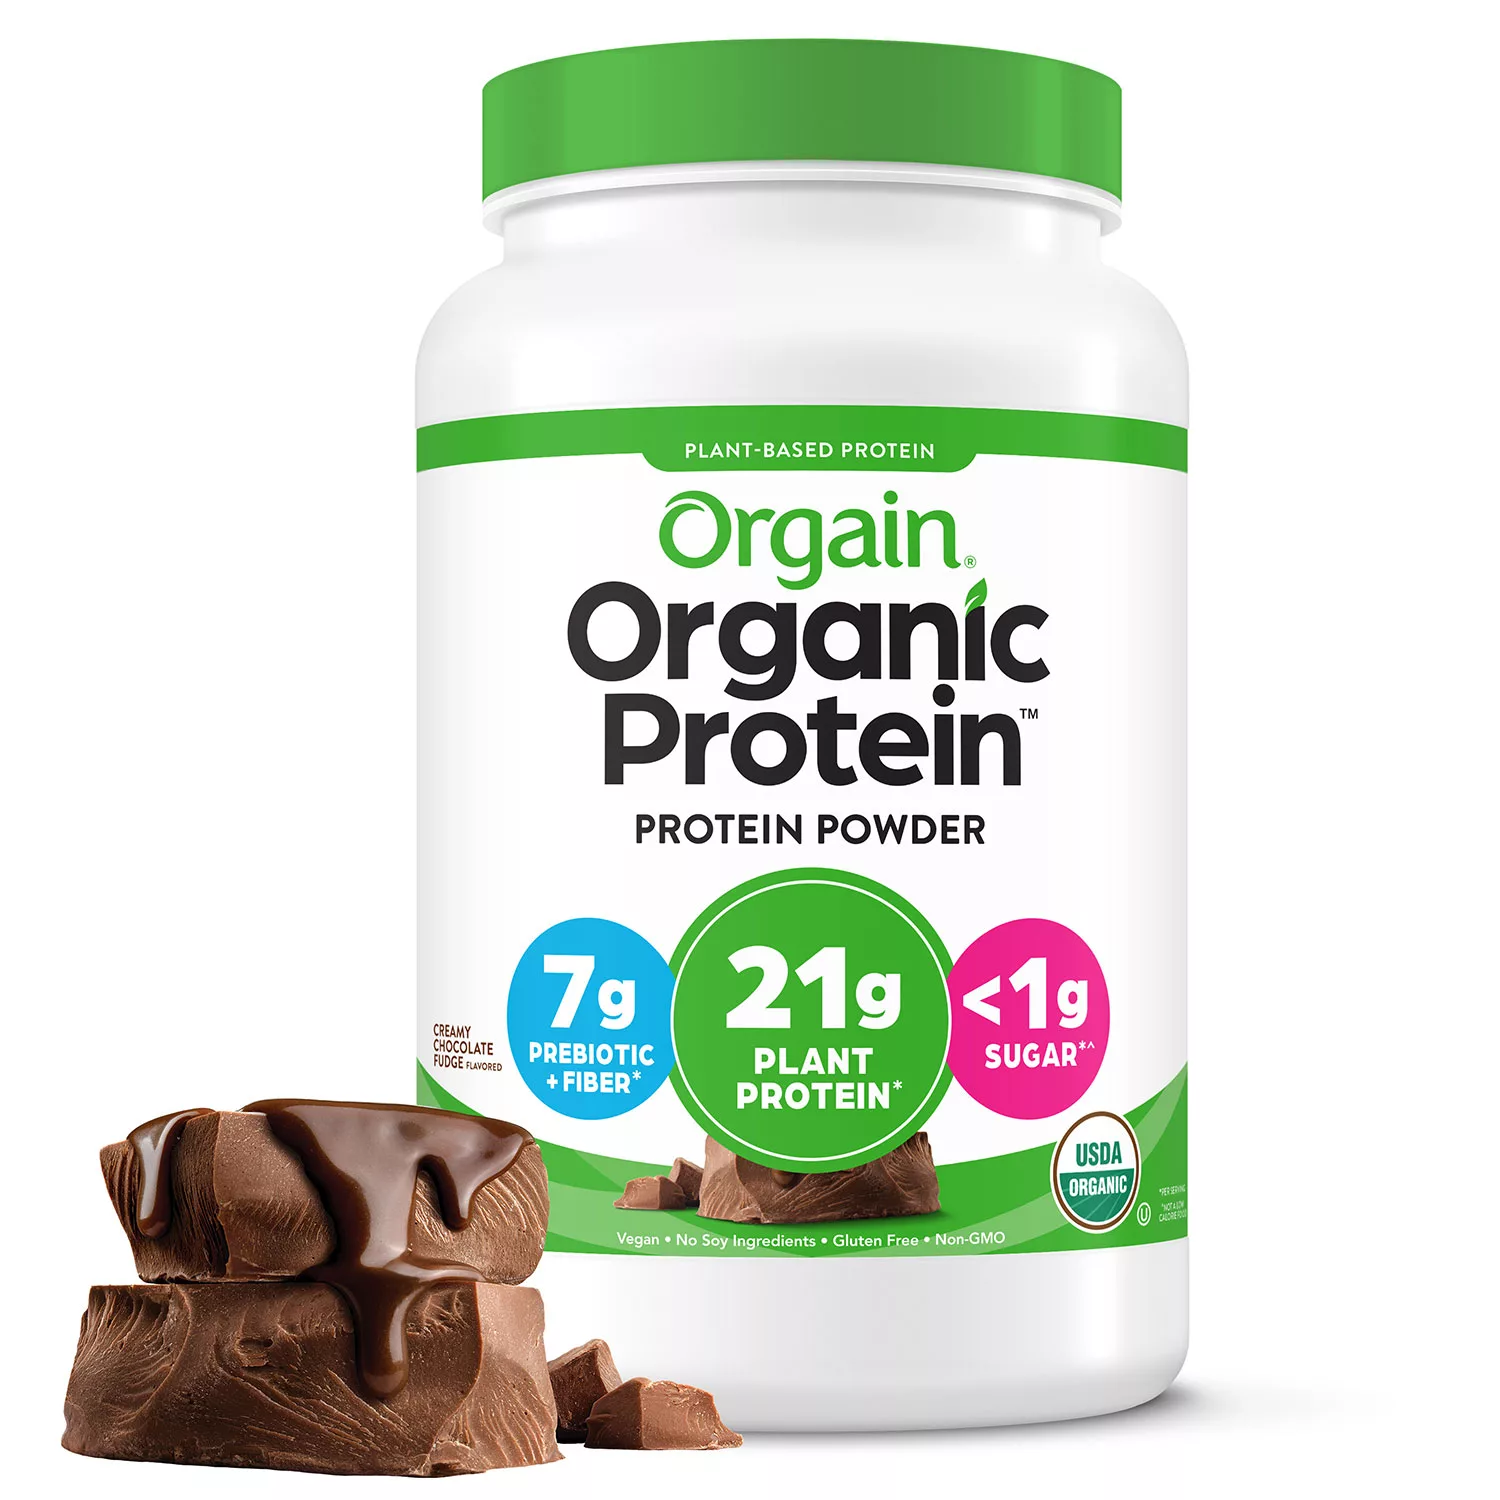 Orgain Organic Protein and Superfoods Plant Based Protein Powder, Creamy Chocolate Fudge, 2.64 lbs